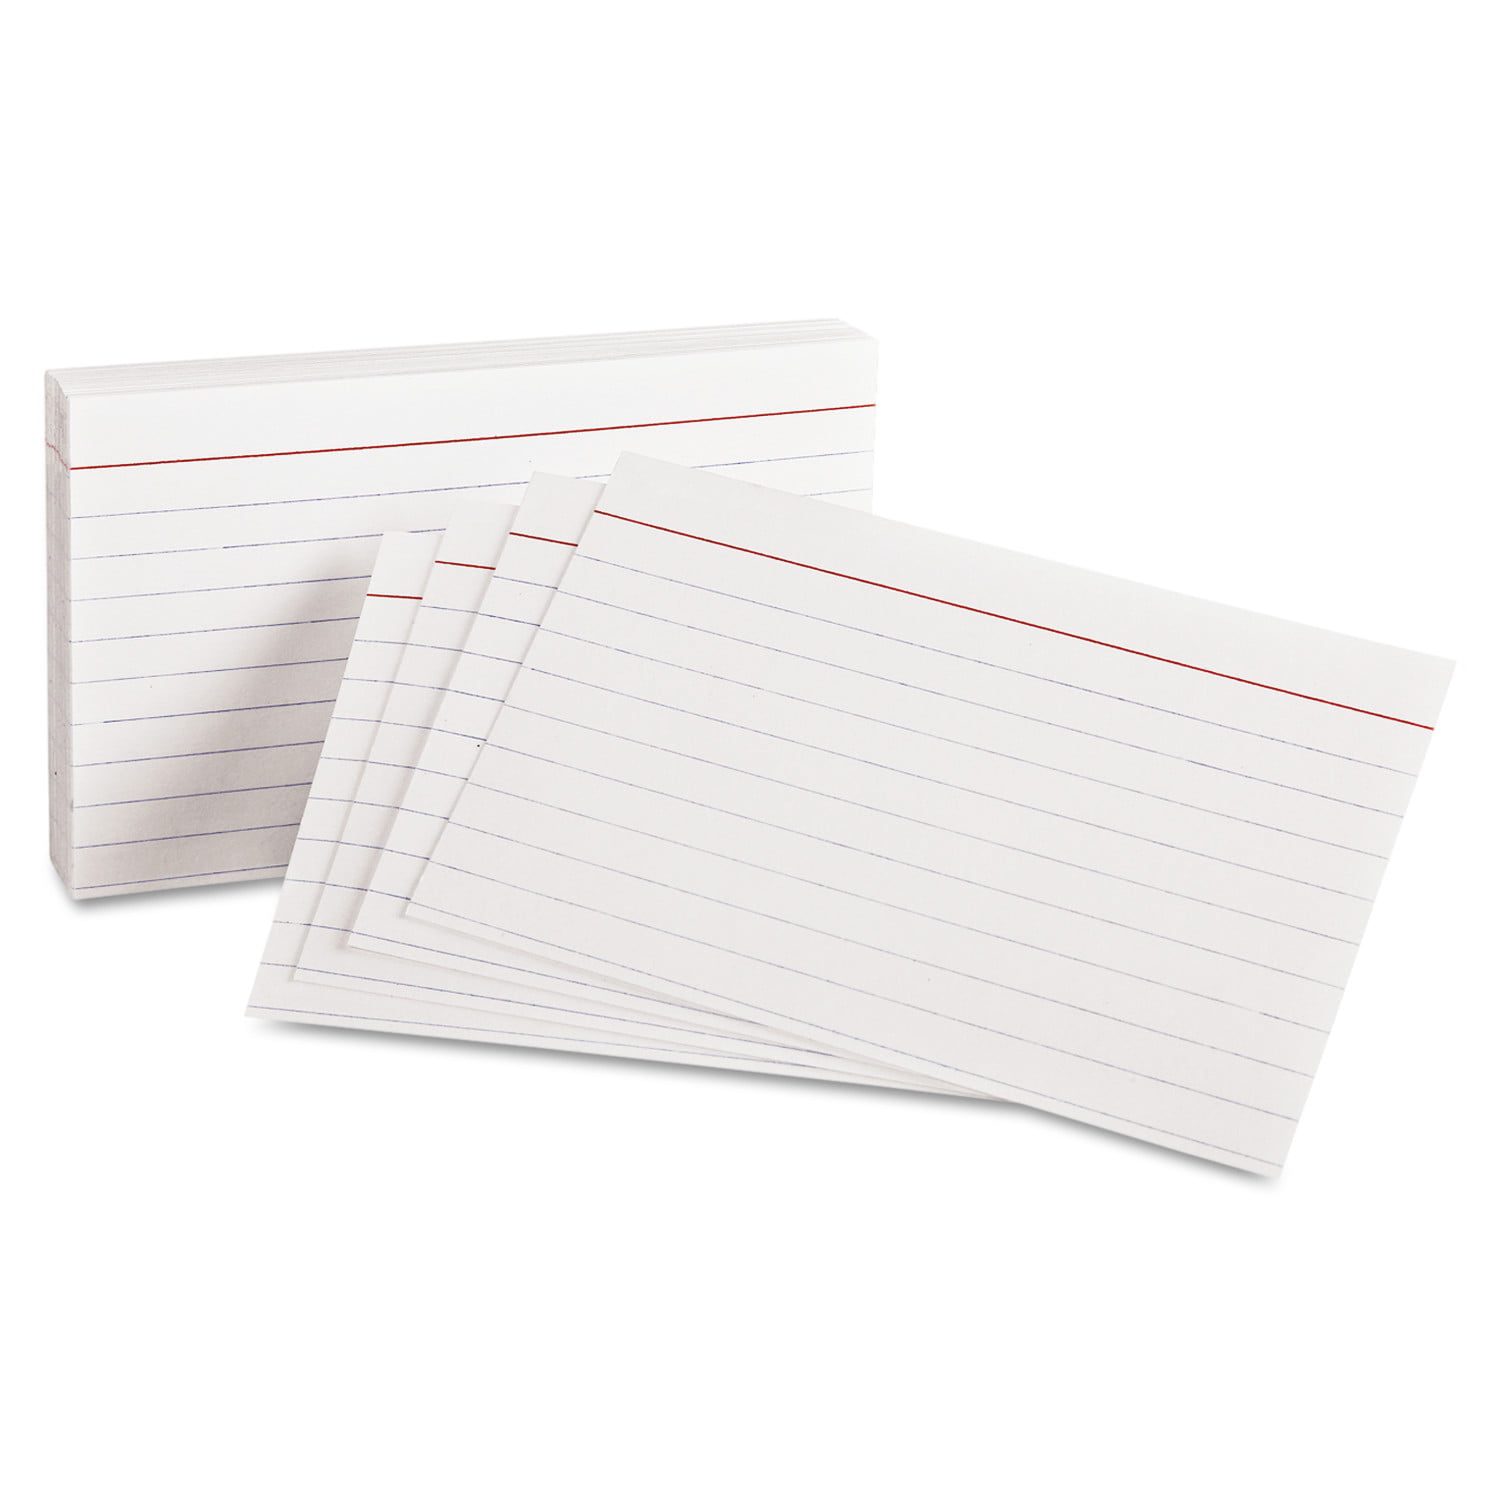 100/Pack ESS30 White Oxford Blank Index Cards 3 x 5 